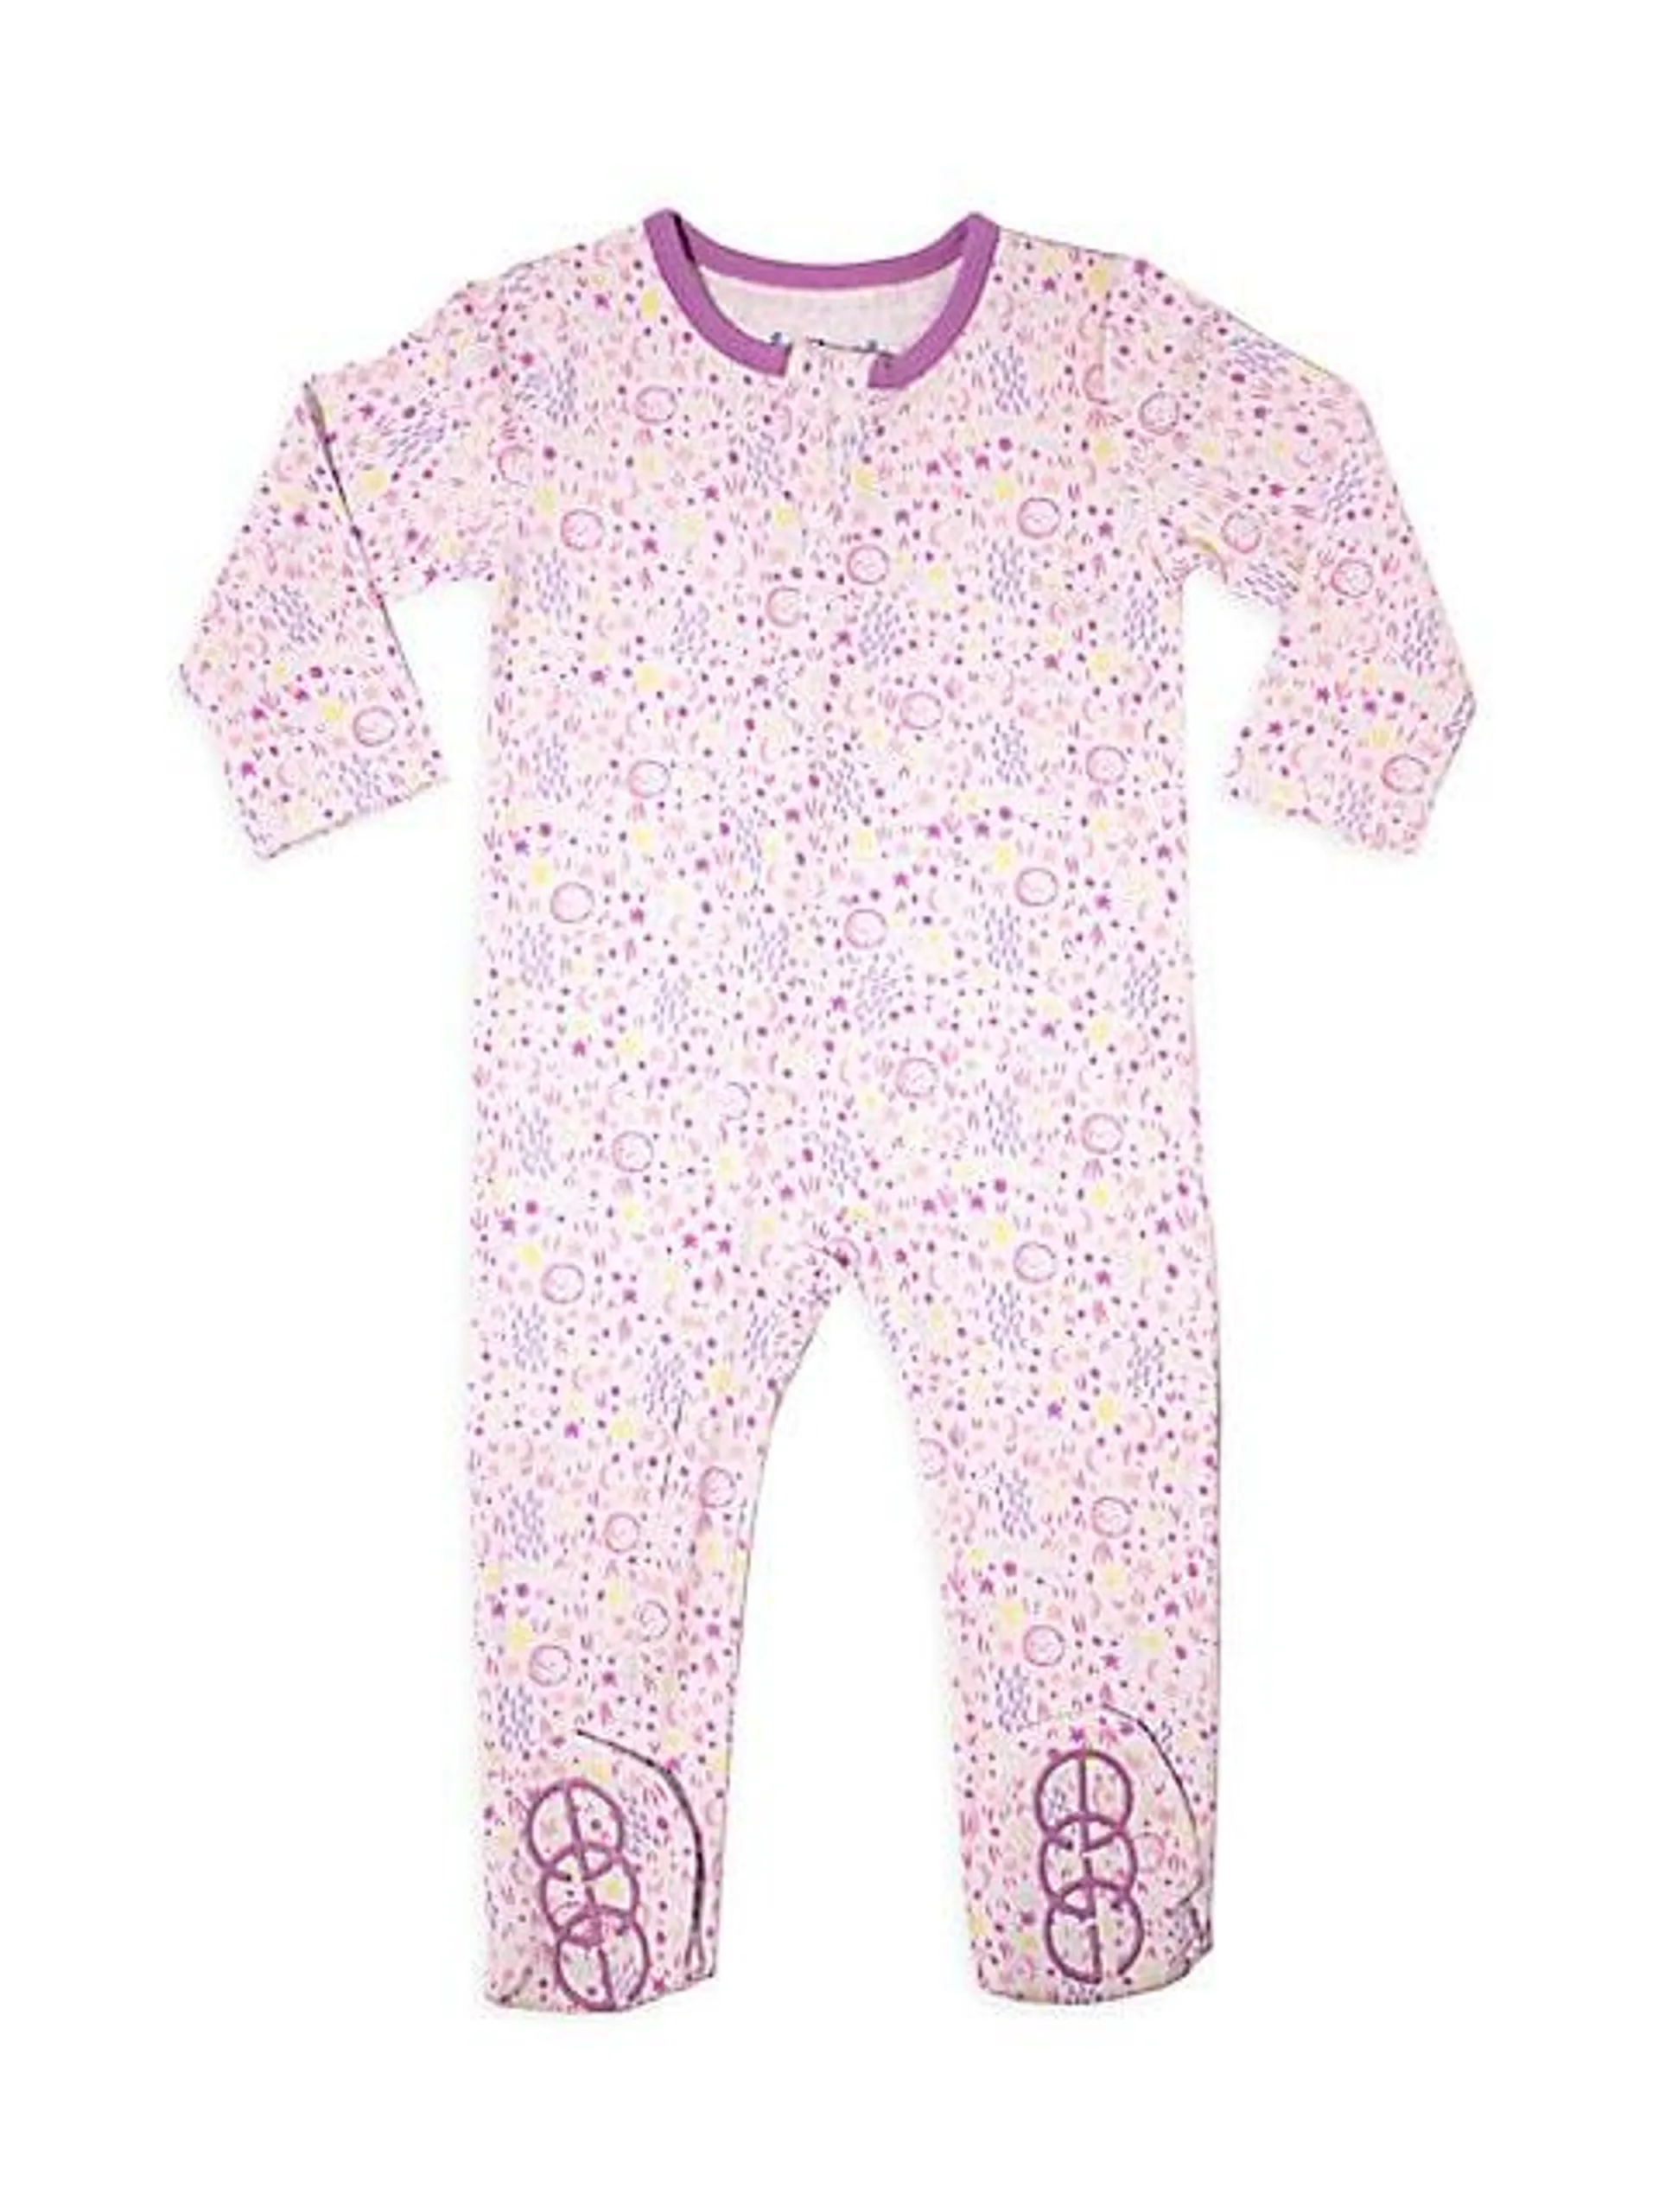 Baby's Smiley Star Print Footie